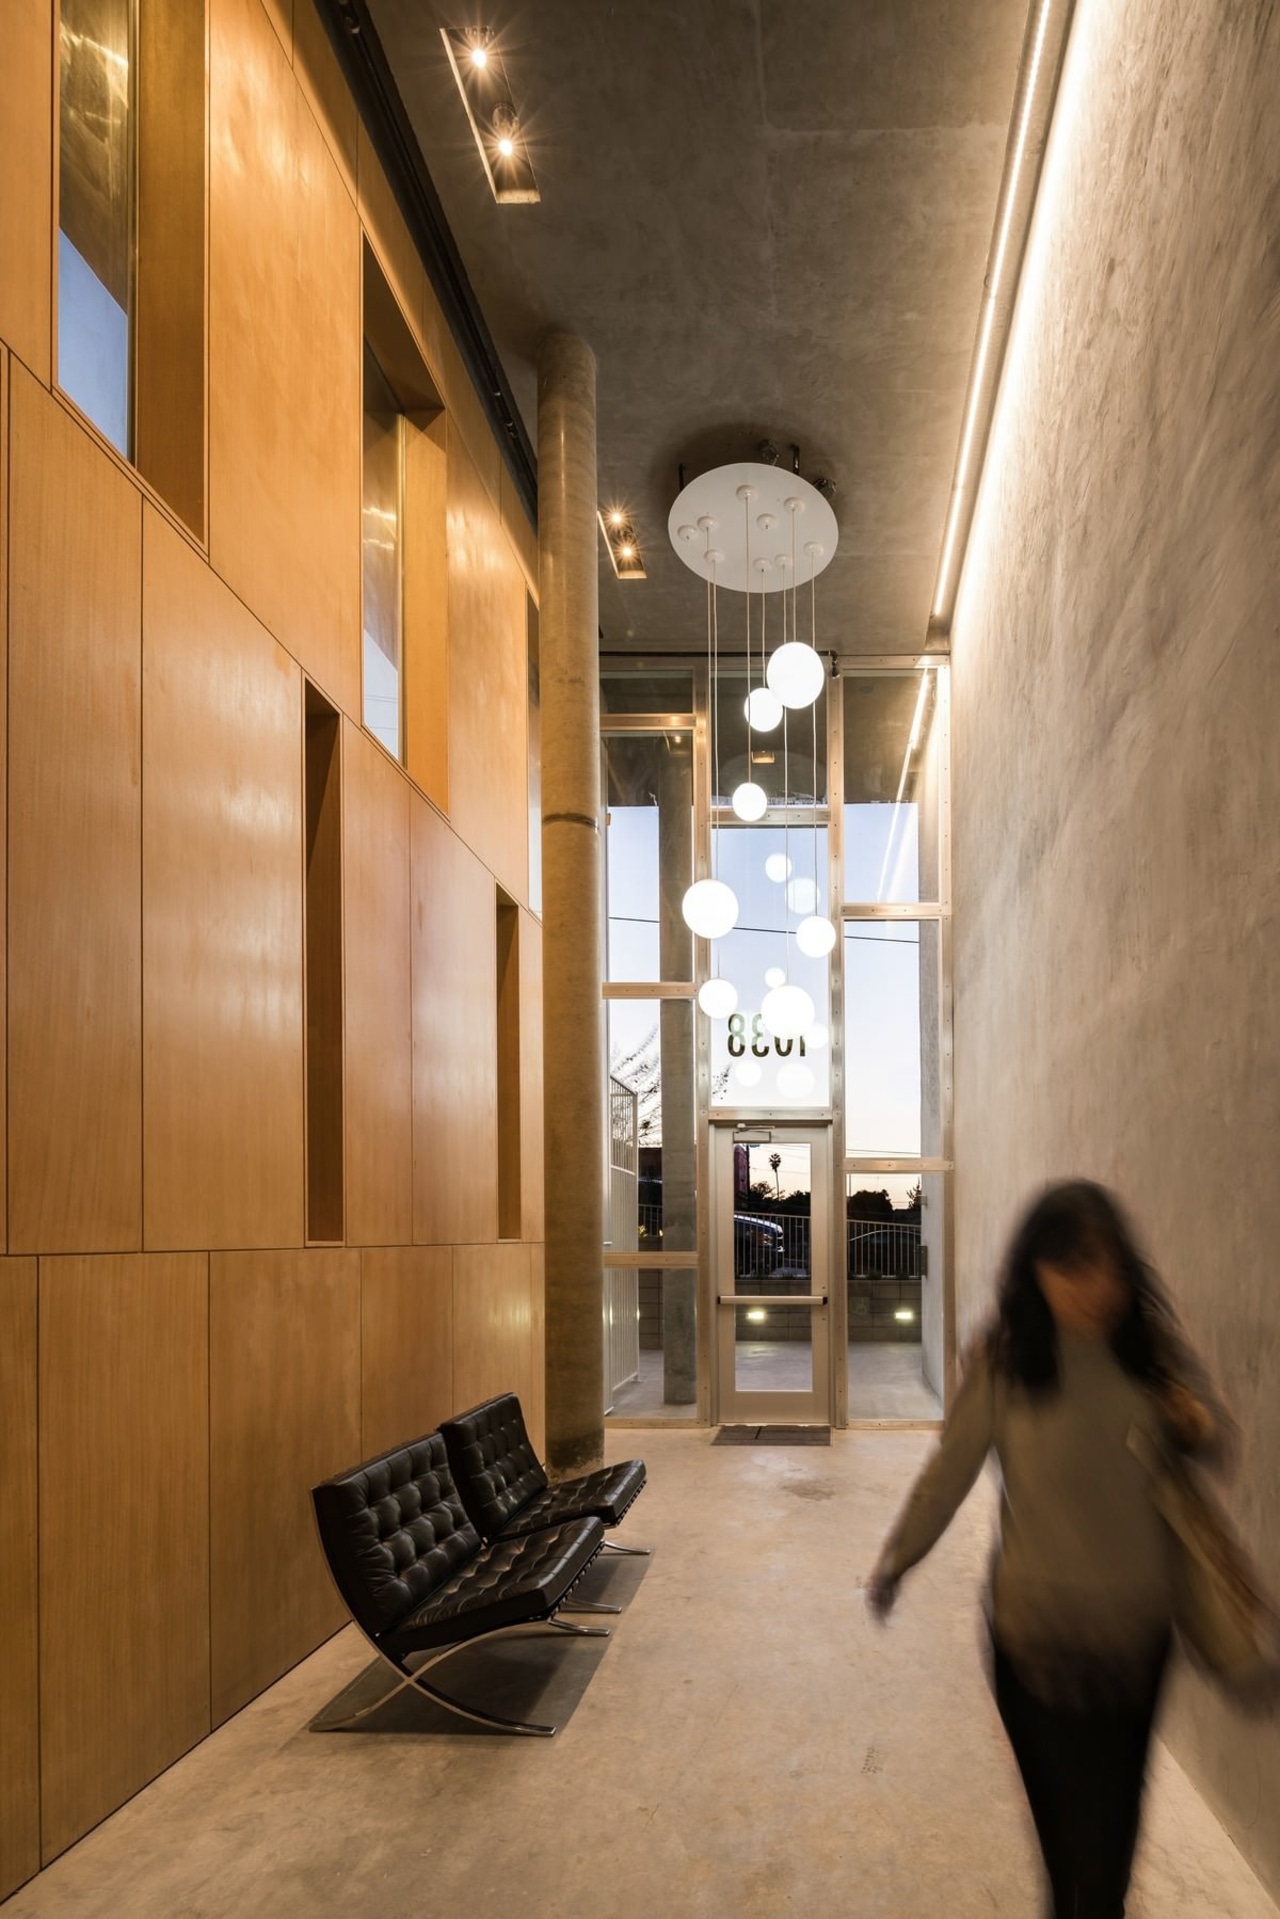 The entrance features contrasting concrete and wood architecture, ceiling, daylighting, floor, flooring, interior design, lobby, brown, orange